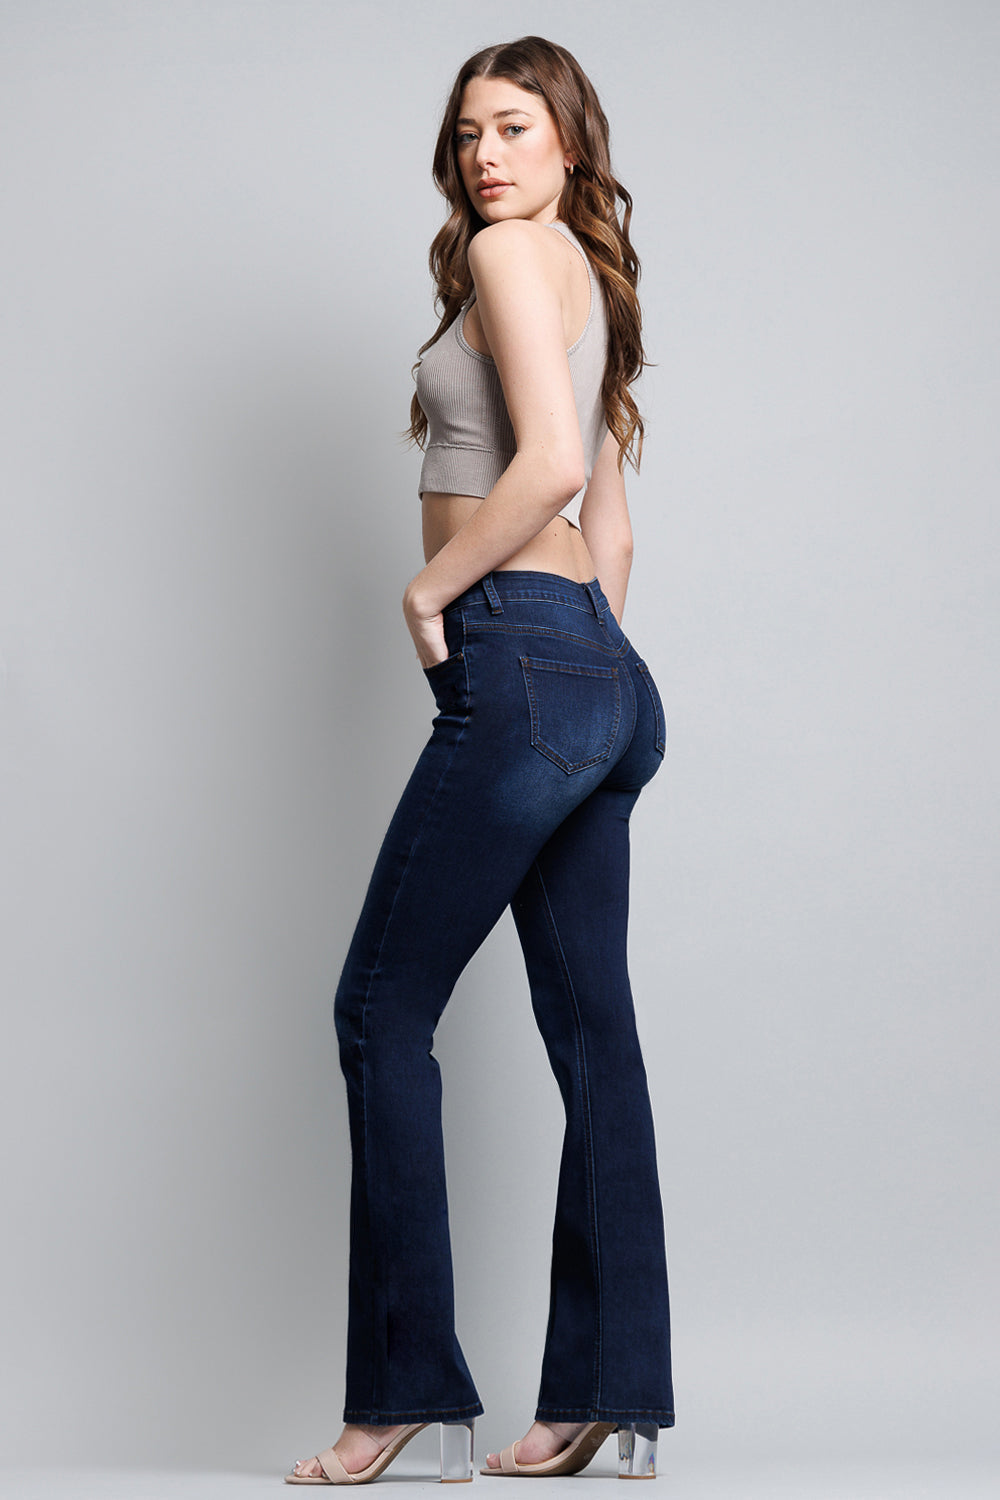 WEP3186 BOOTCUT JEANS MAIN IMAGE